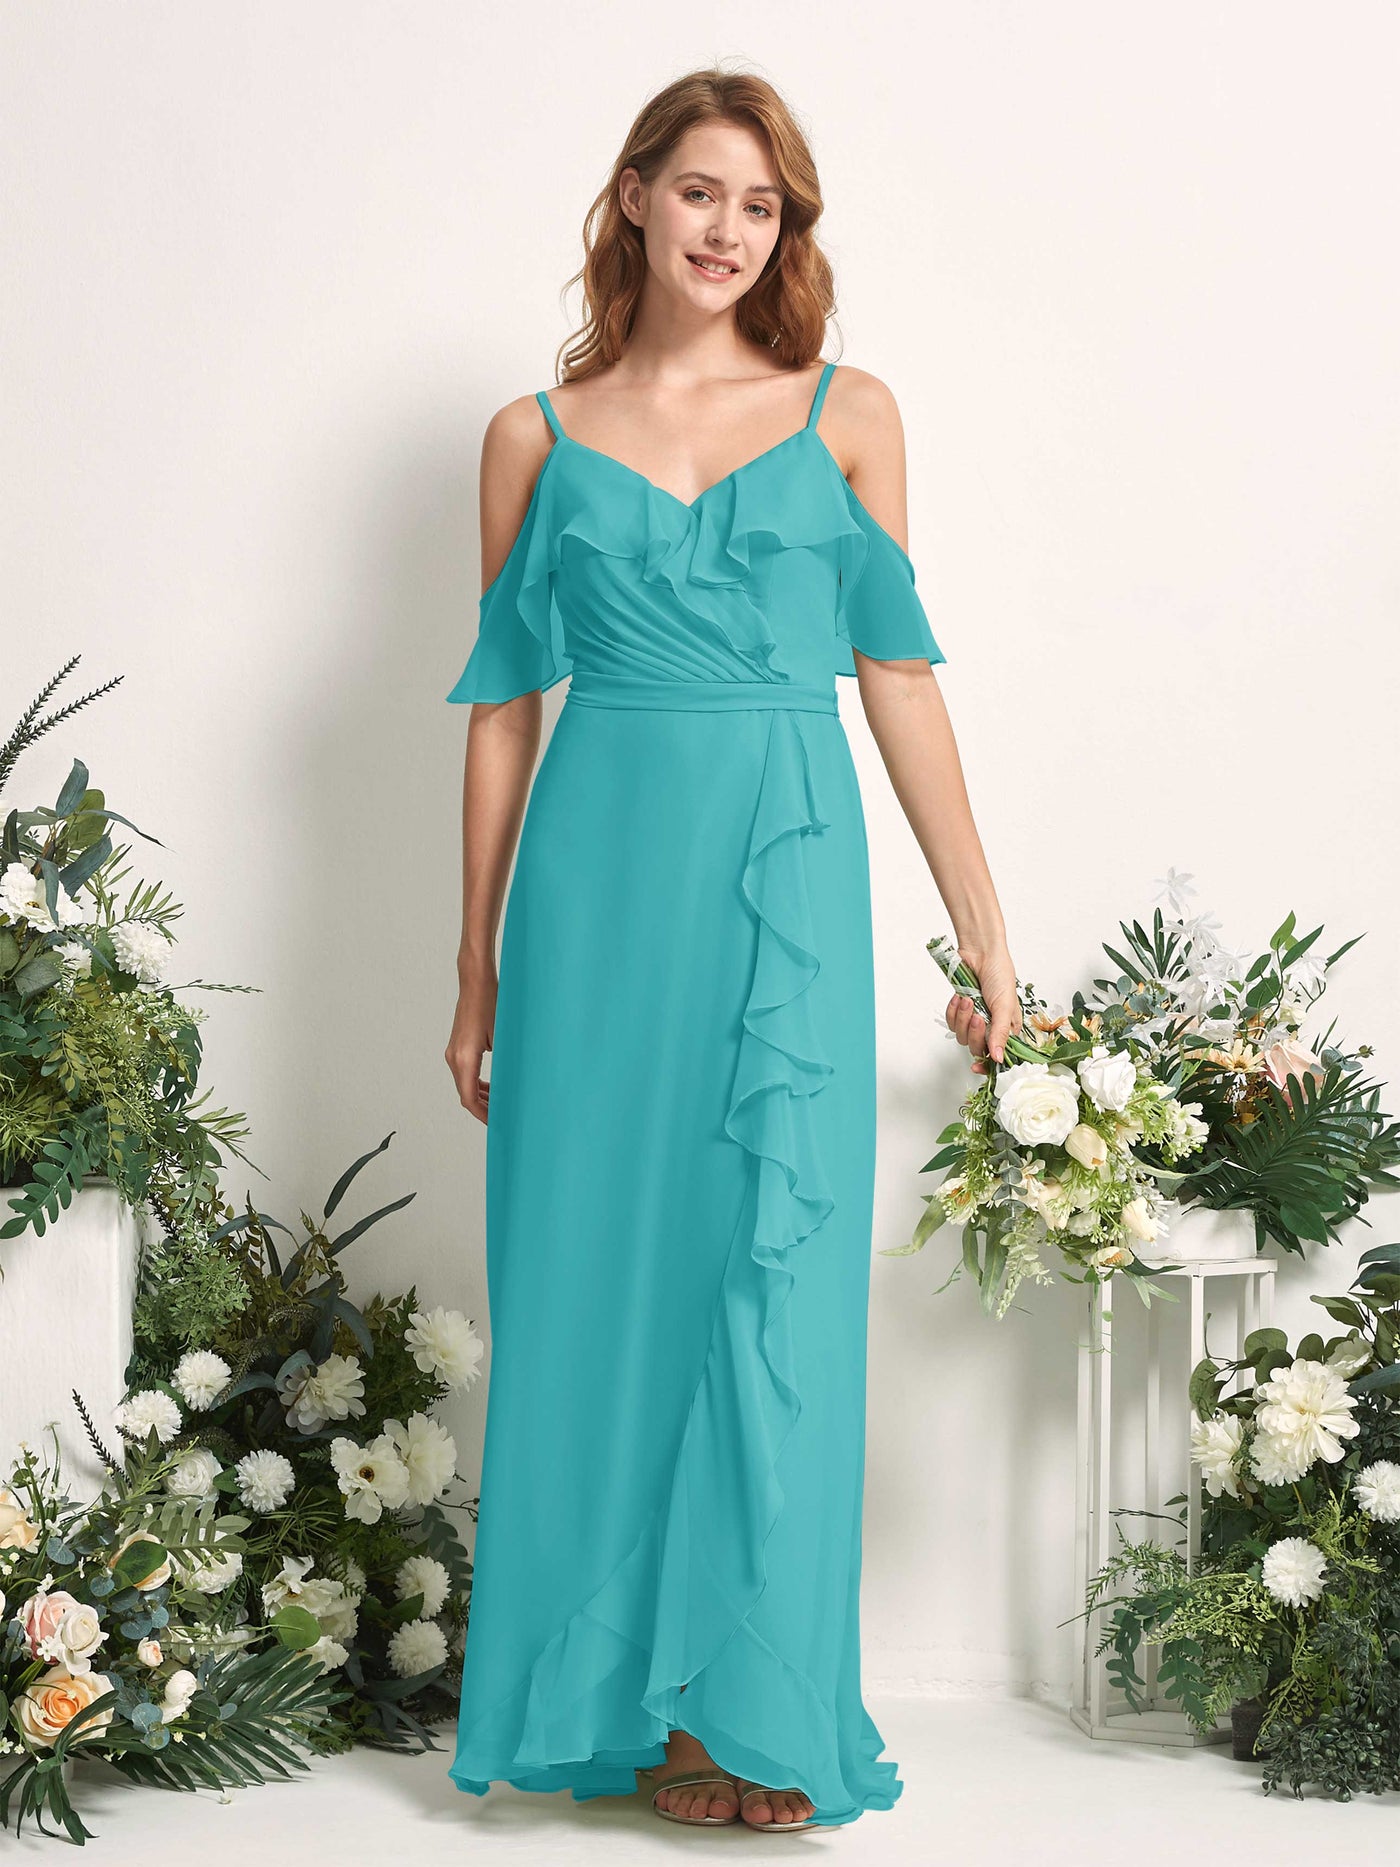 Bridesmaid Dress A-line Chiffon Spaghetti-straps Full Length Sleeveless Wedding Party Dress - Turquoise (81227423)#color_turquoise